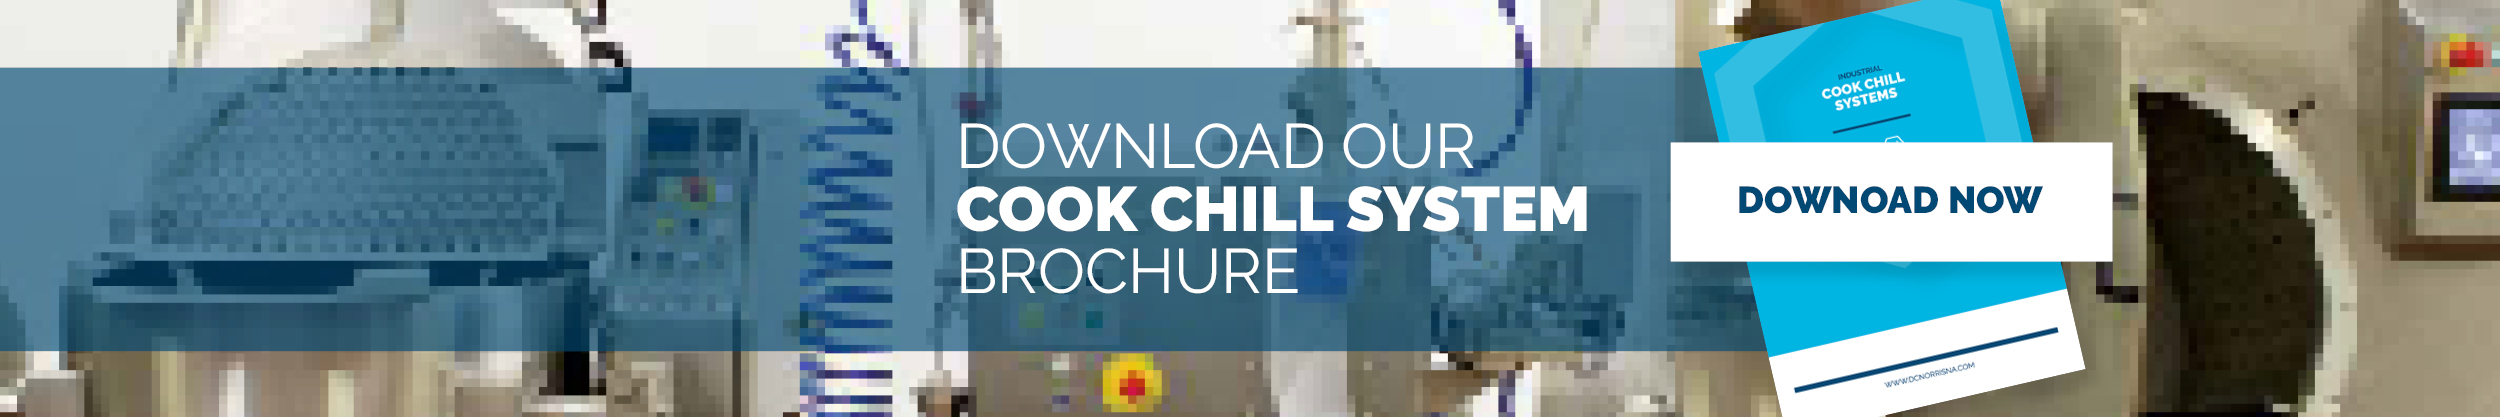 an image of the DC Norris North America industrial cook chill systems brochure